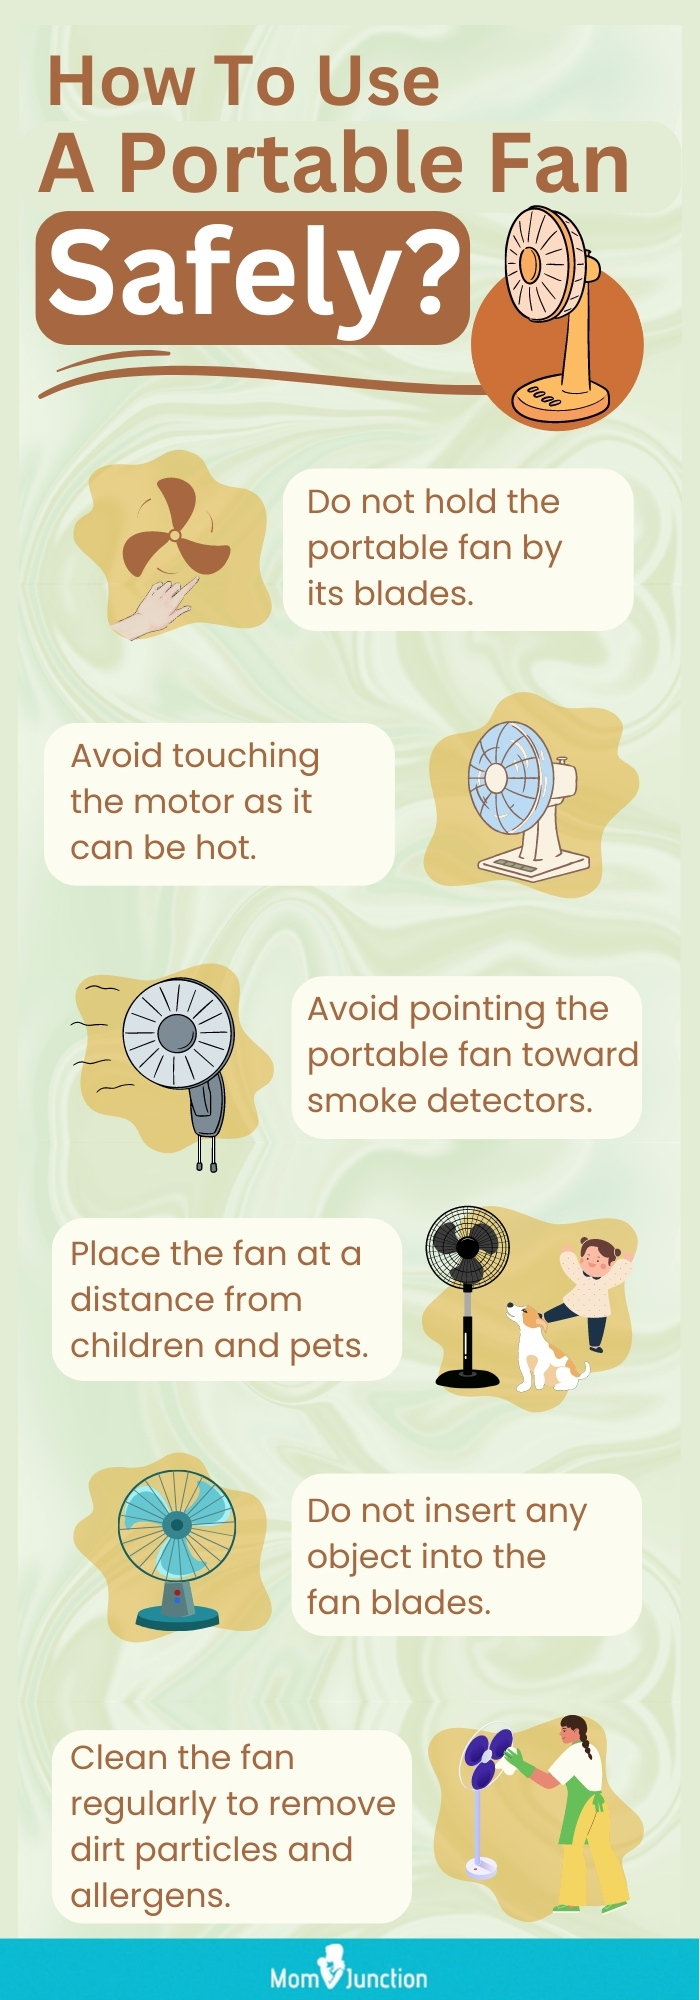 How To Use A Portable Fan Safely